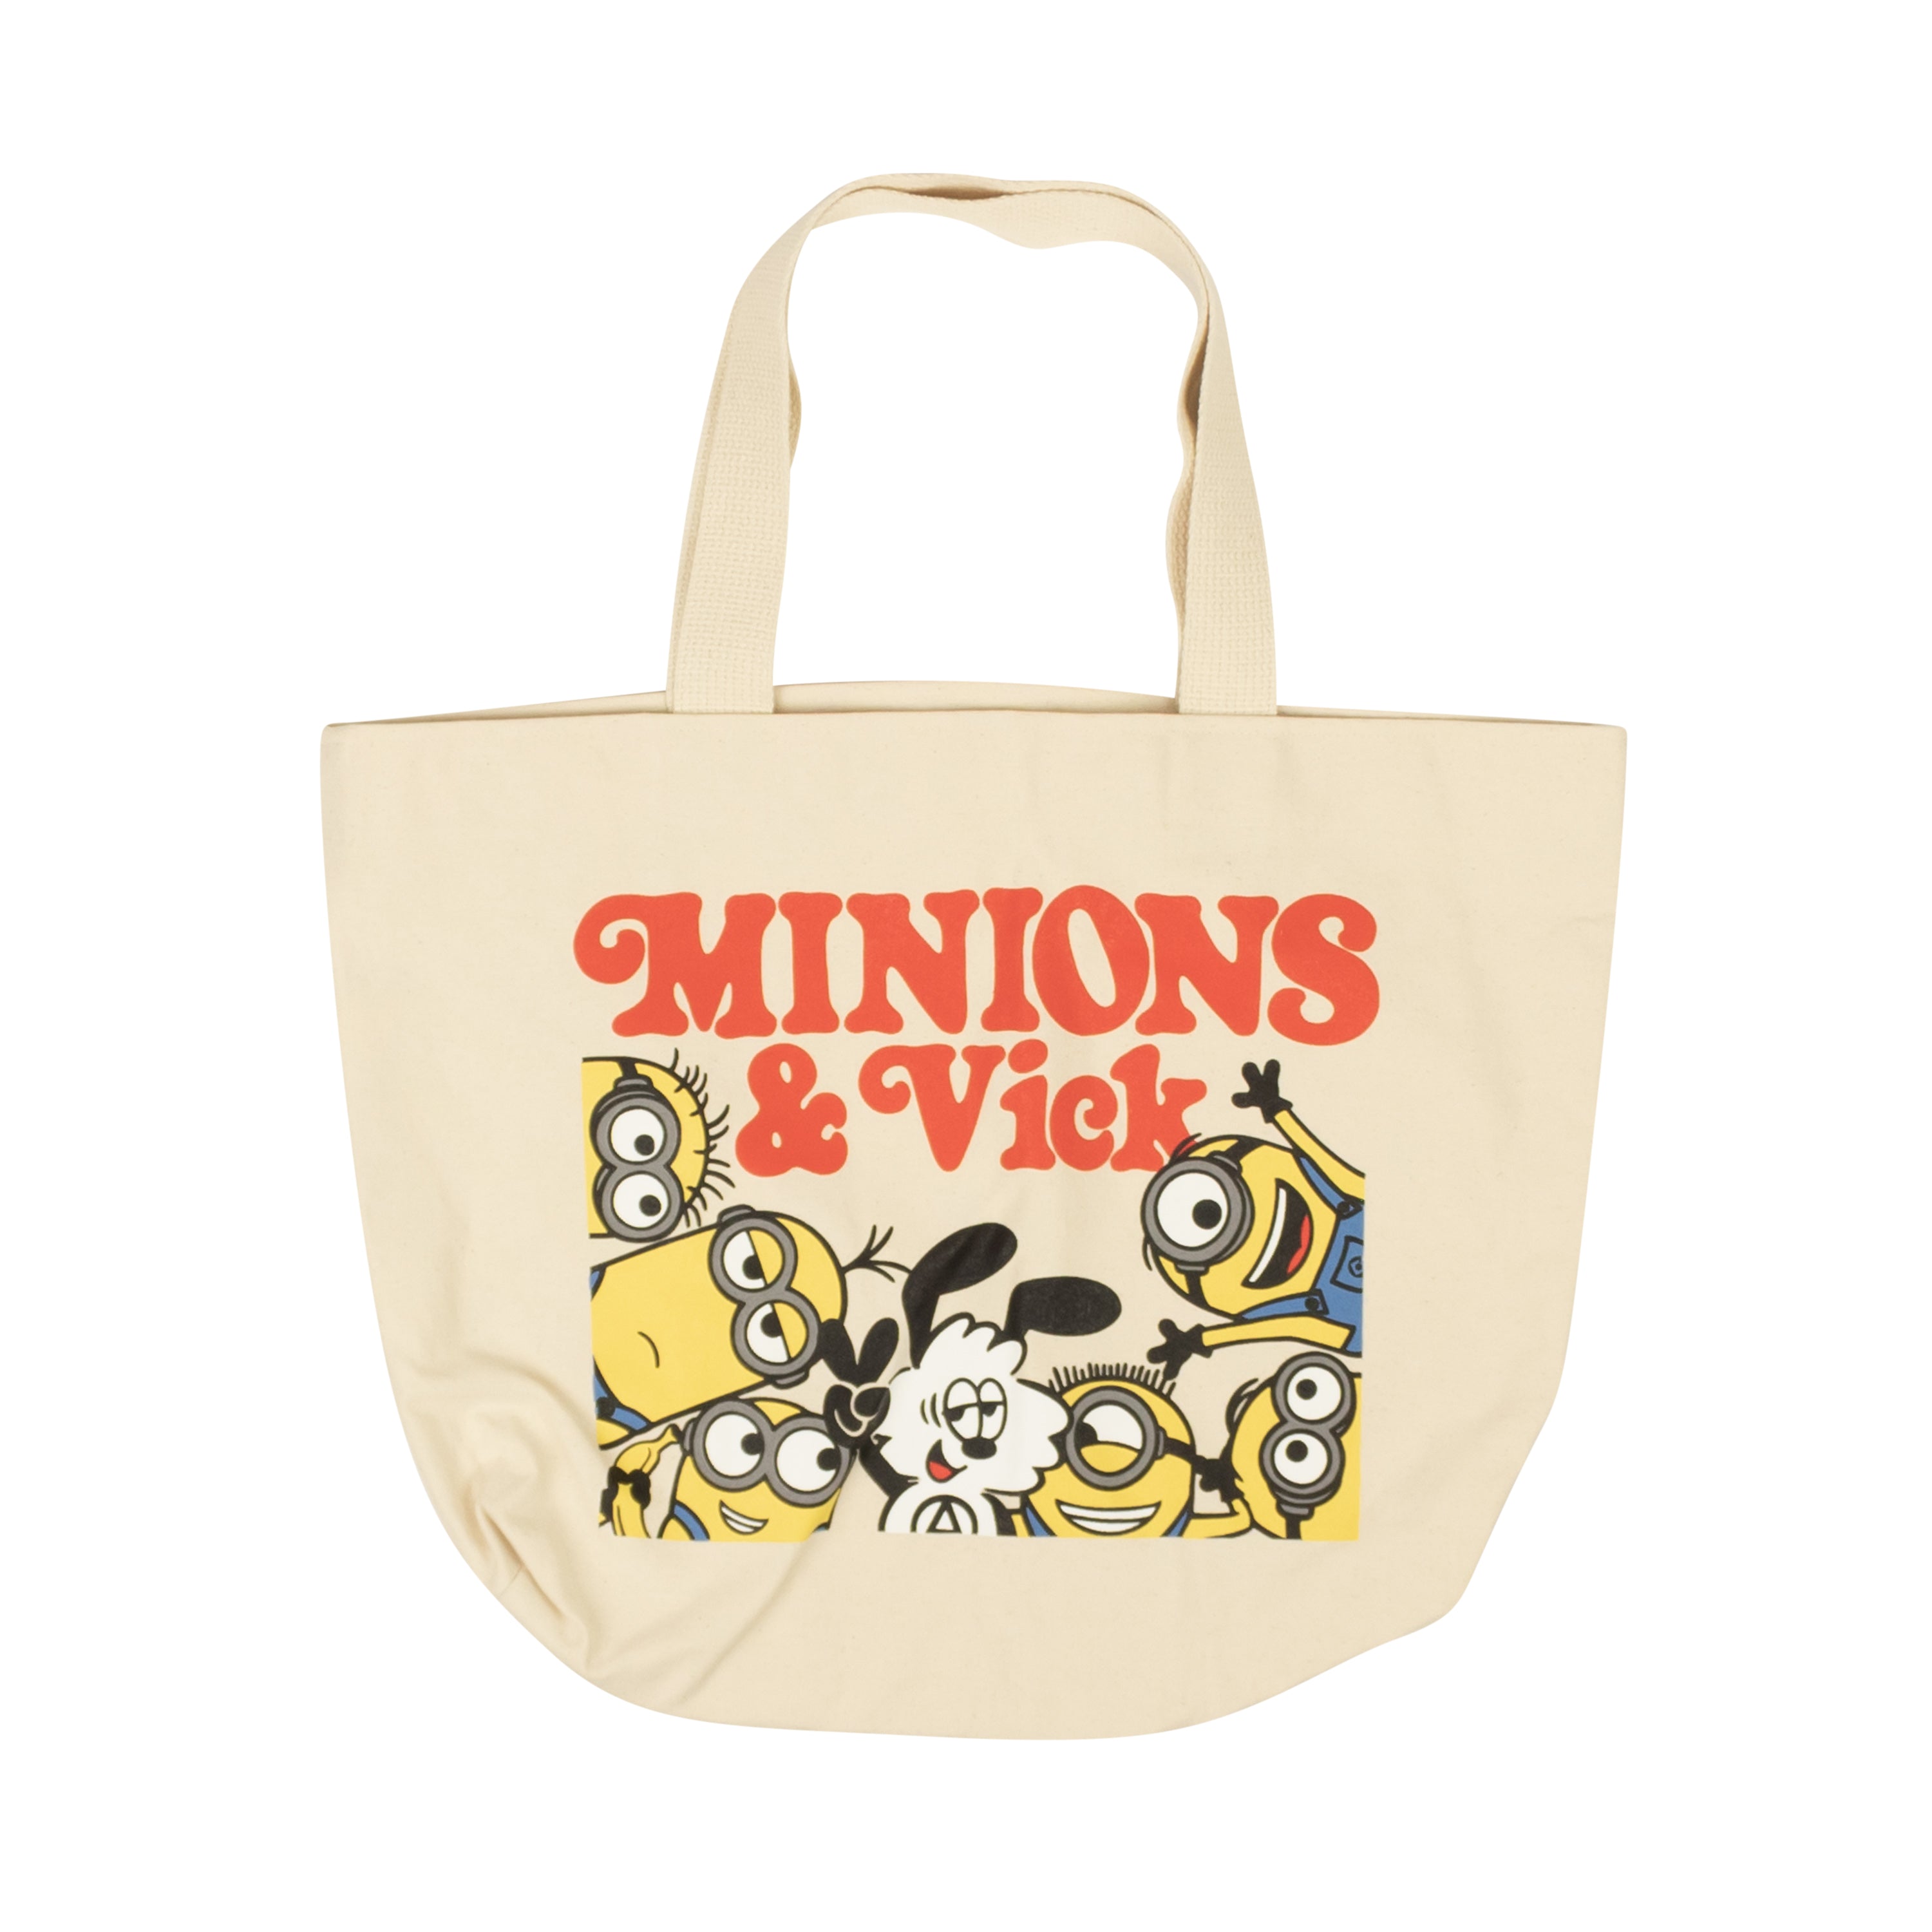 Complexcon Wasted Youth Toteminions X Totebag - Natural In White